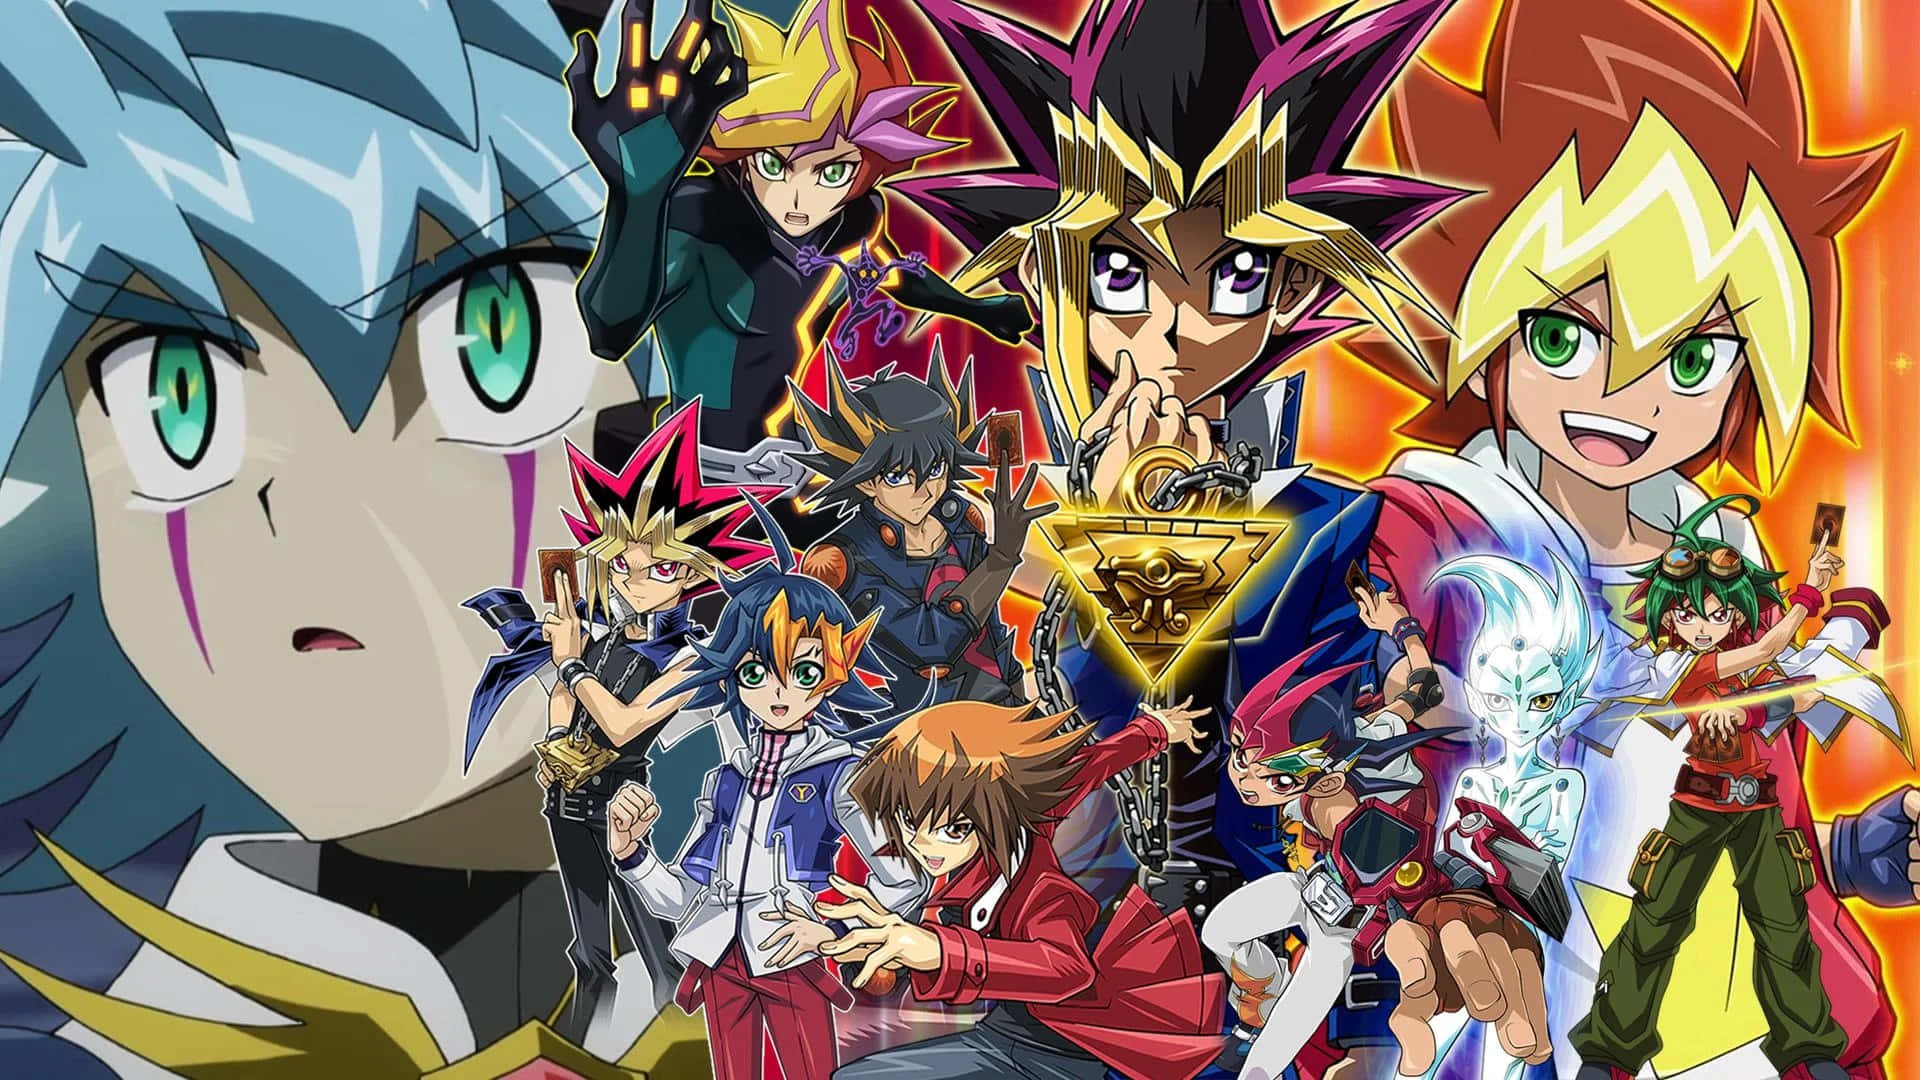 Astral from Yu-Gi-Oh! Zexal standing tall with cards in hand Wallpaper